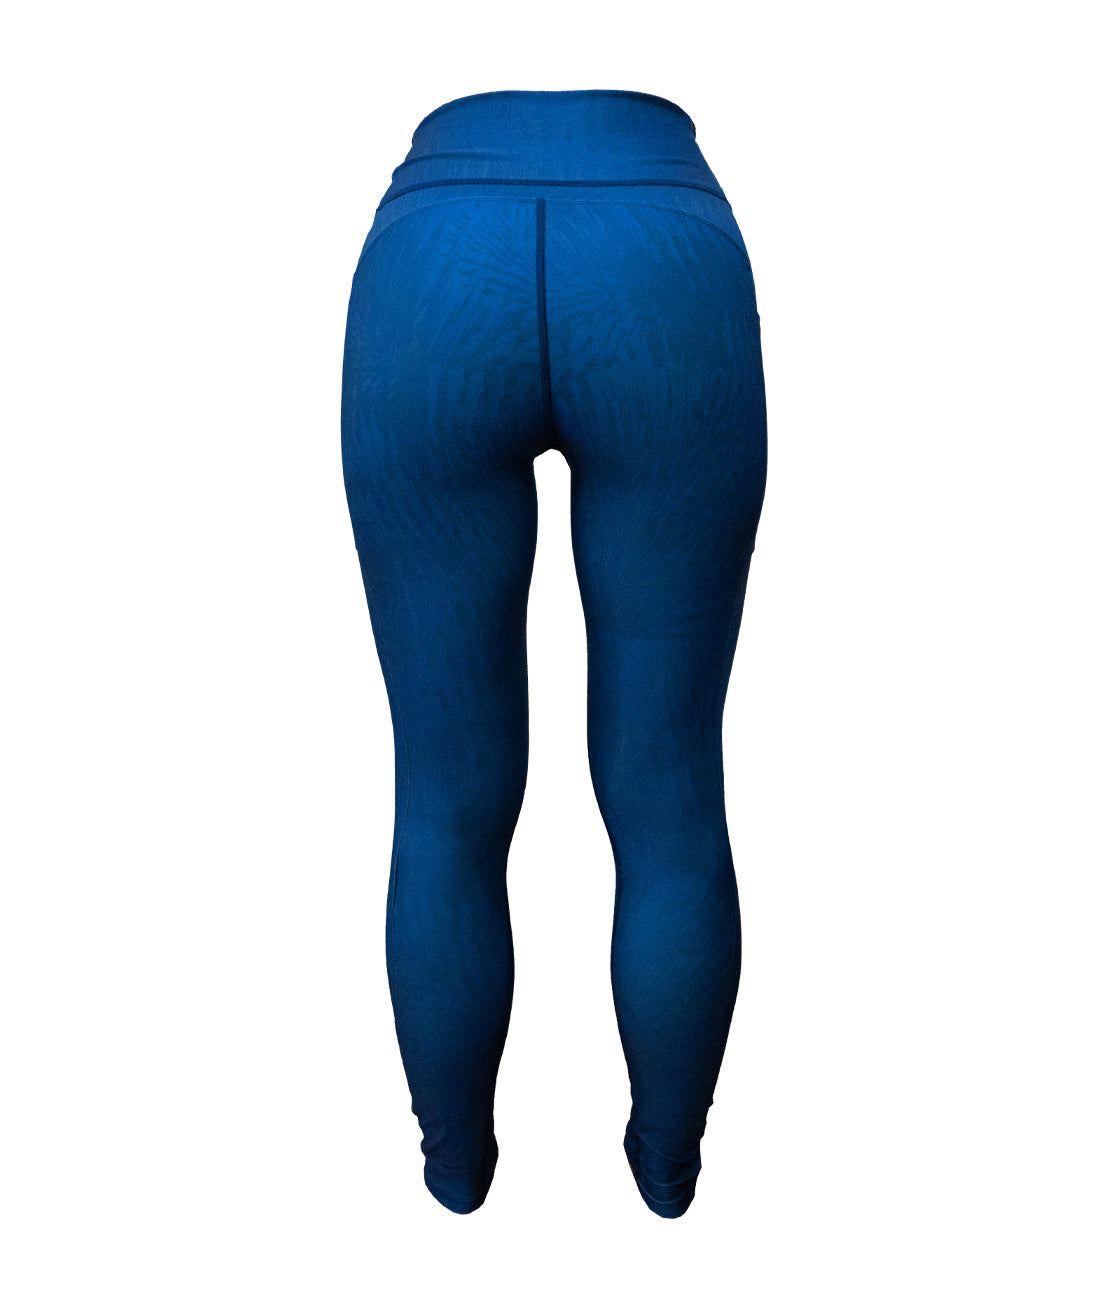 Women's Solid Legging (Only available in the USA)